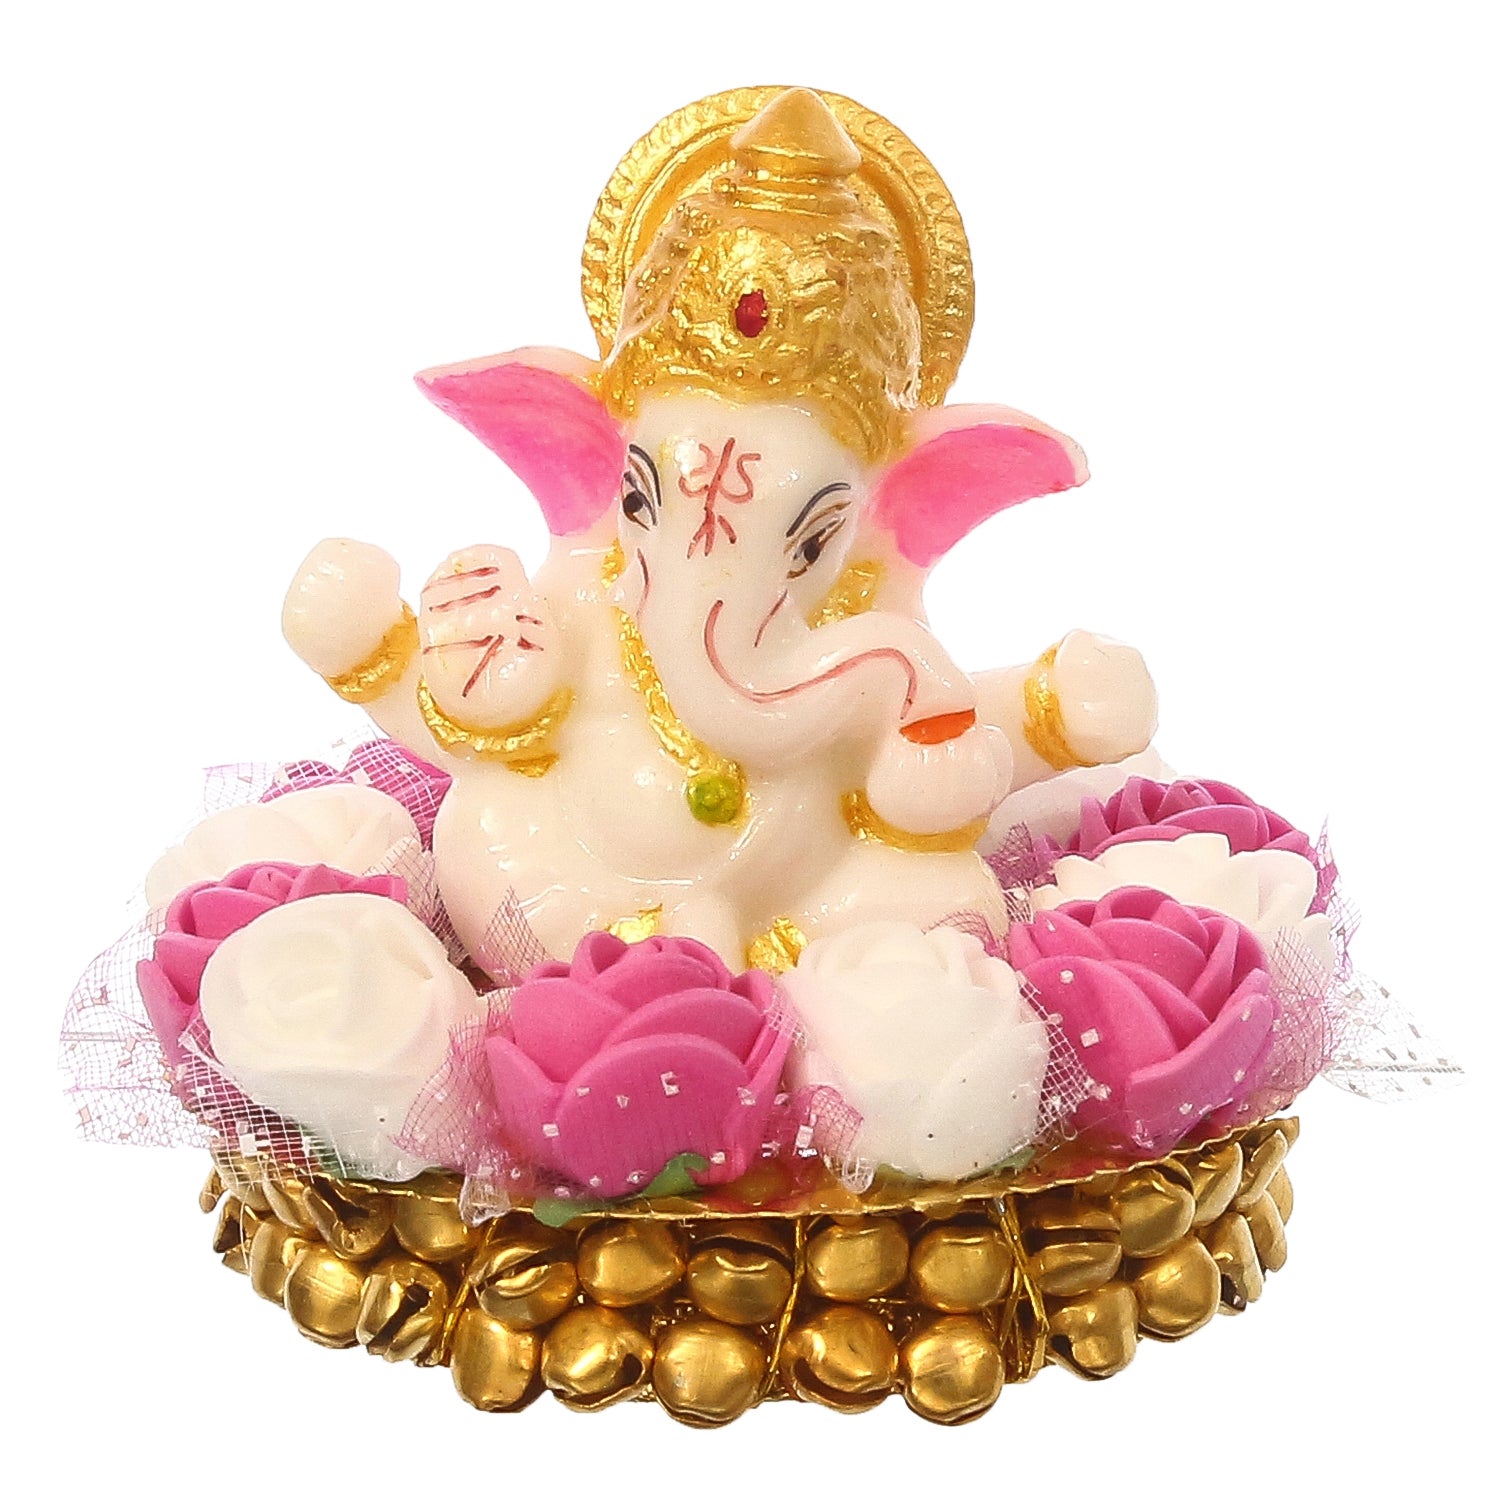 Golden and White Polyresin Lord Ganesha Idol on Decorative Handcrafted Plate with Pink and White Flowers 2